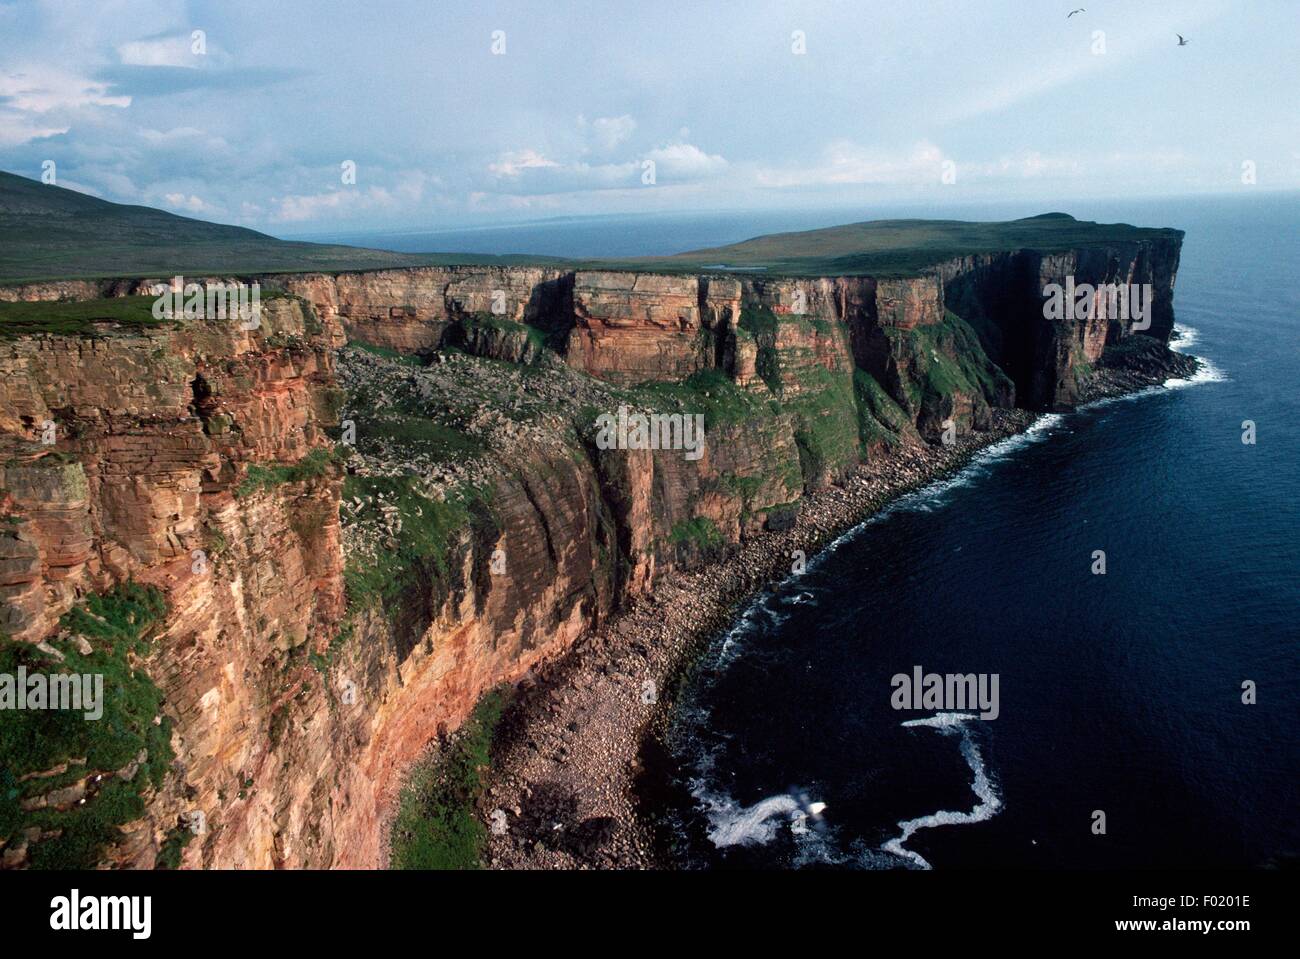 The cliffs overlooking the sea on the Isle of Hoy, Orkney Islands, Scotland, United Kingdom. Stock Photo